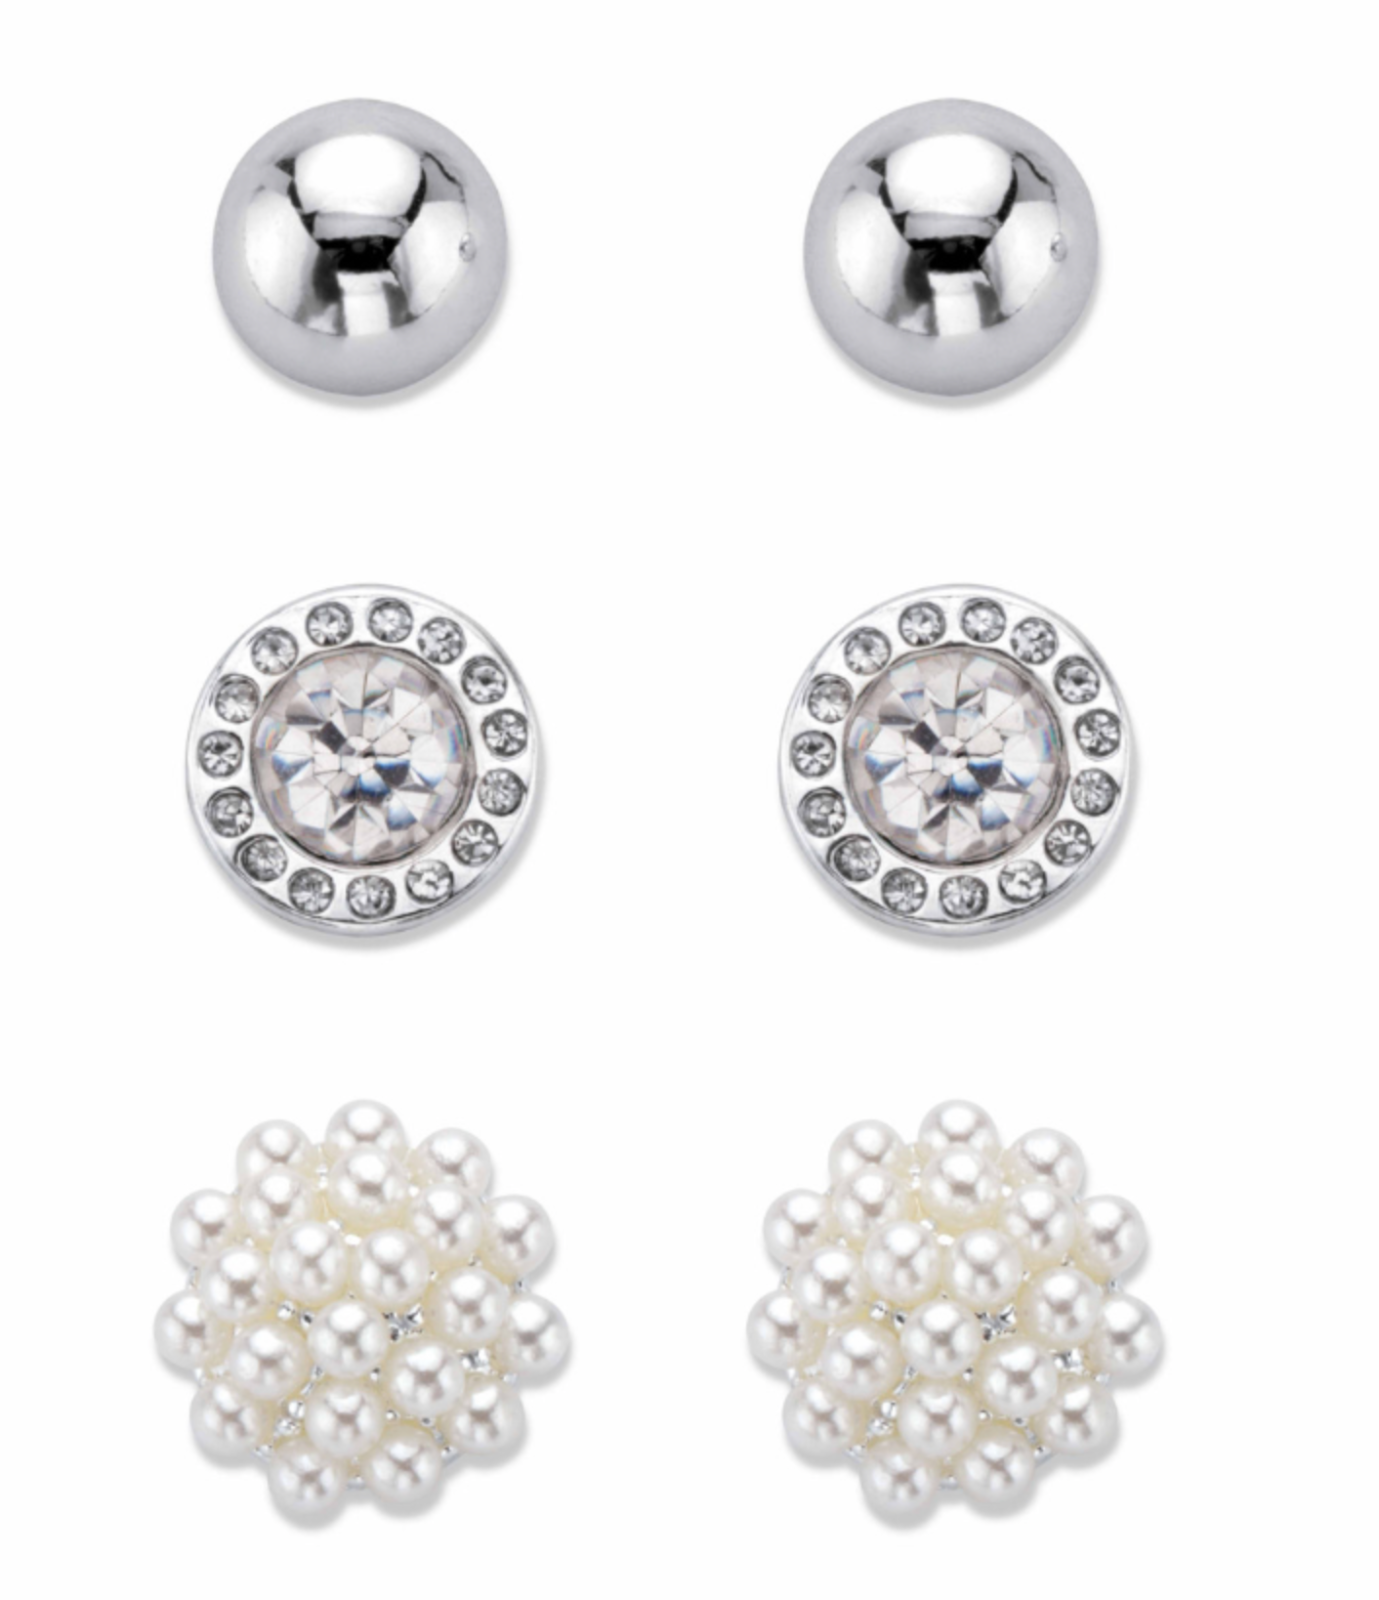 SIMULATED PEARL AND CRYSTAL 3 PAIR STUD EARRING SET SILVERTONE - $75.99